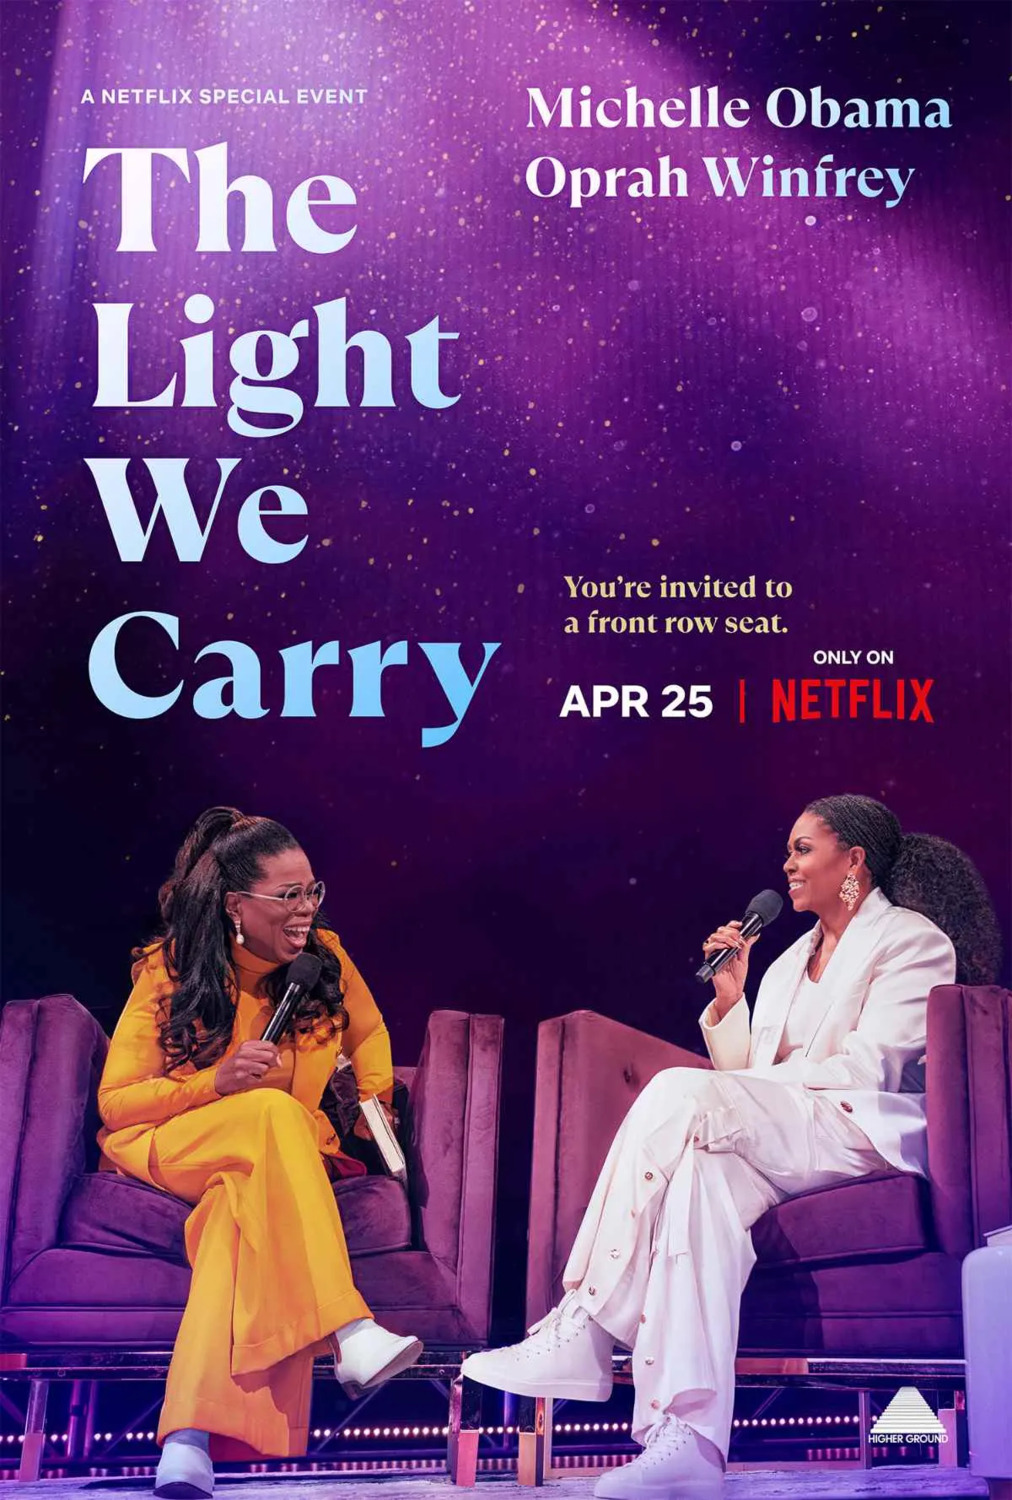 Extra Large TV Poster Image for The Light We Carry: Michelle Obama and Oprah Winfrey 